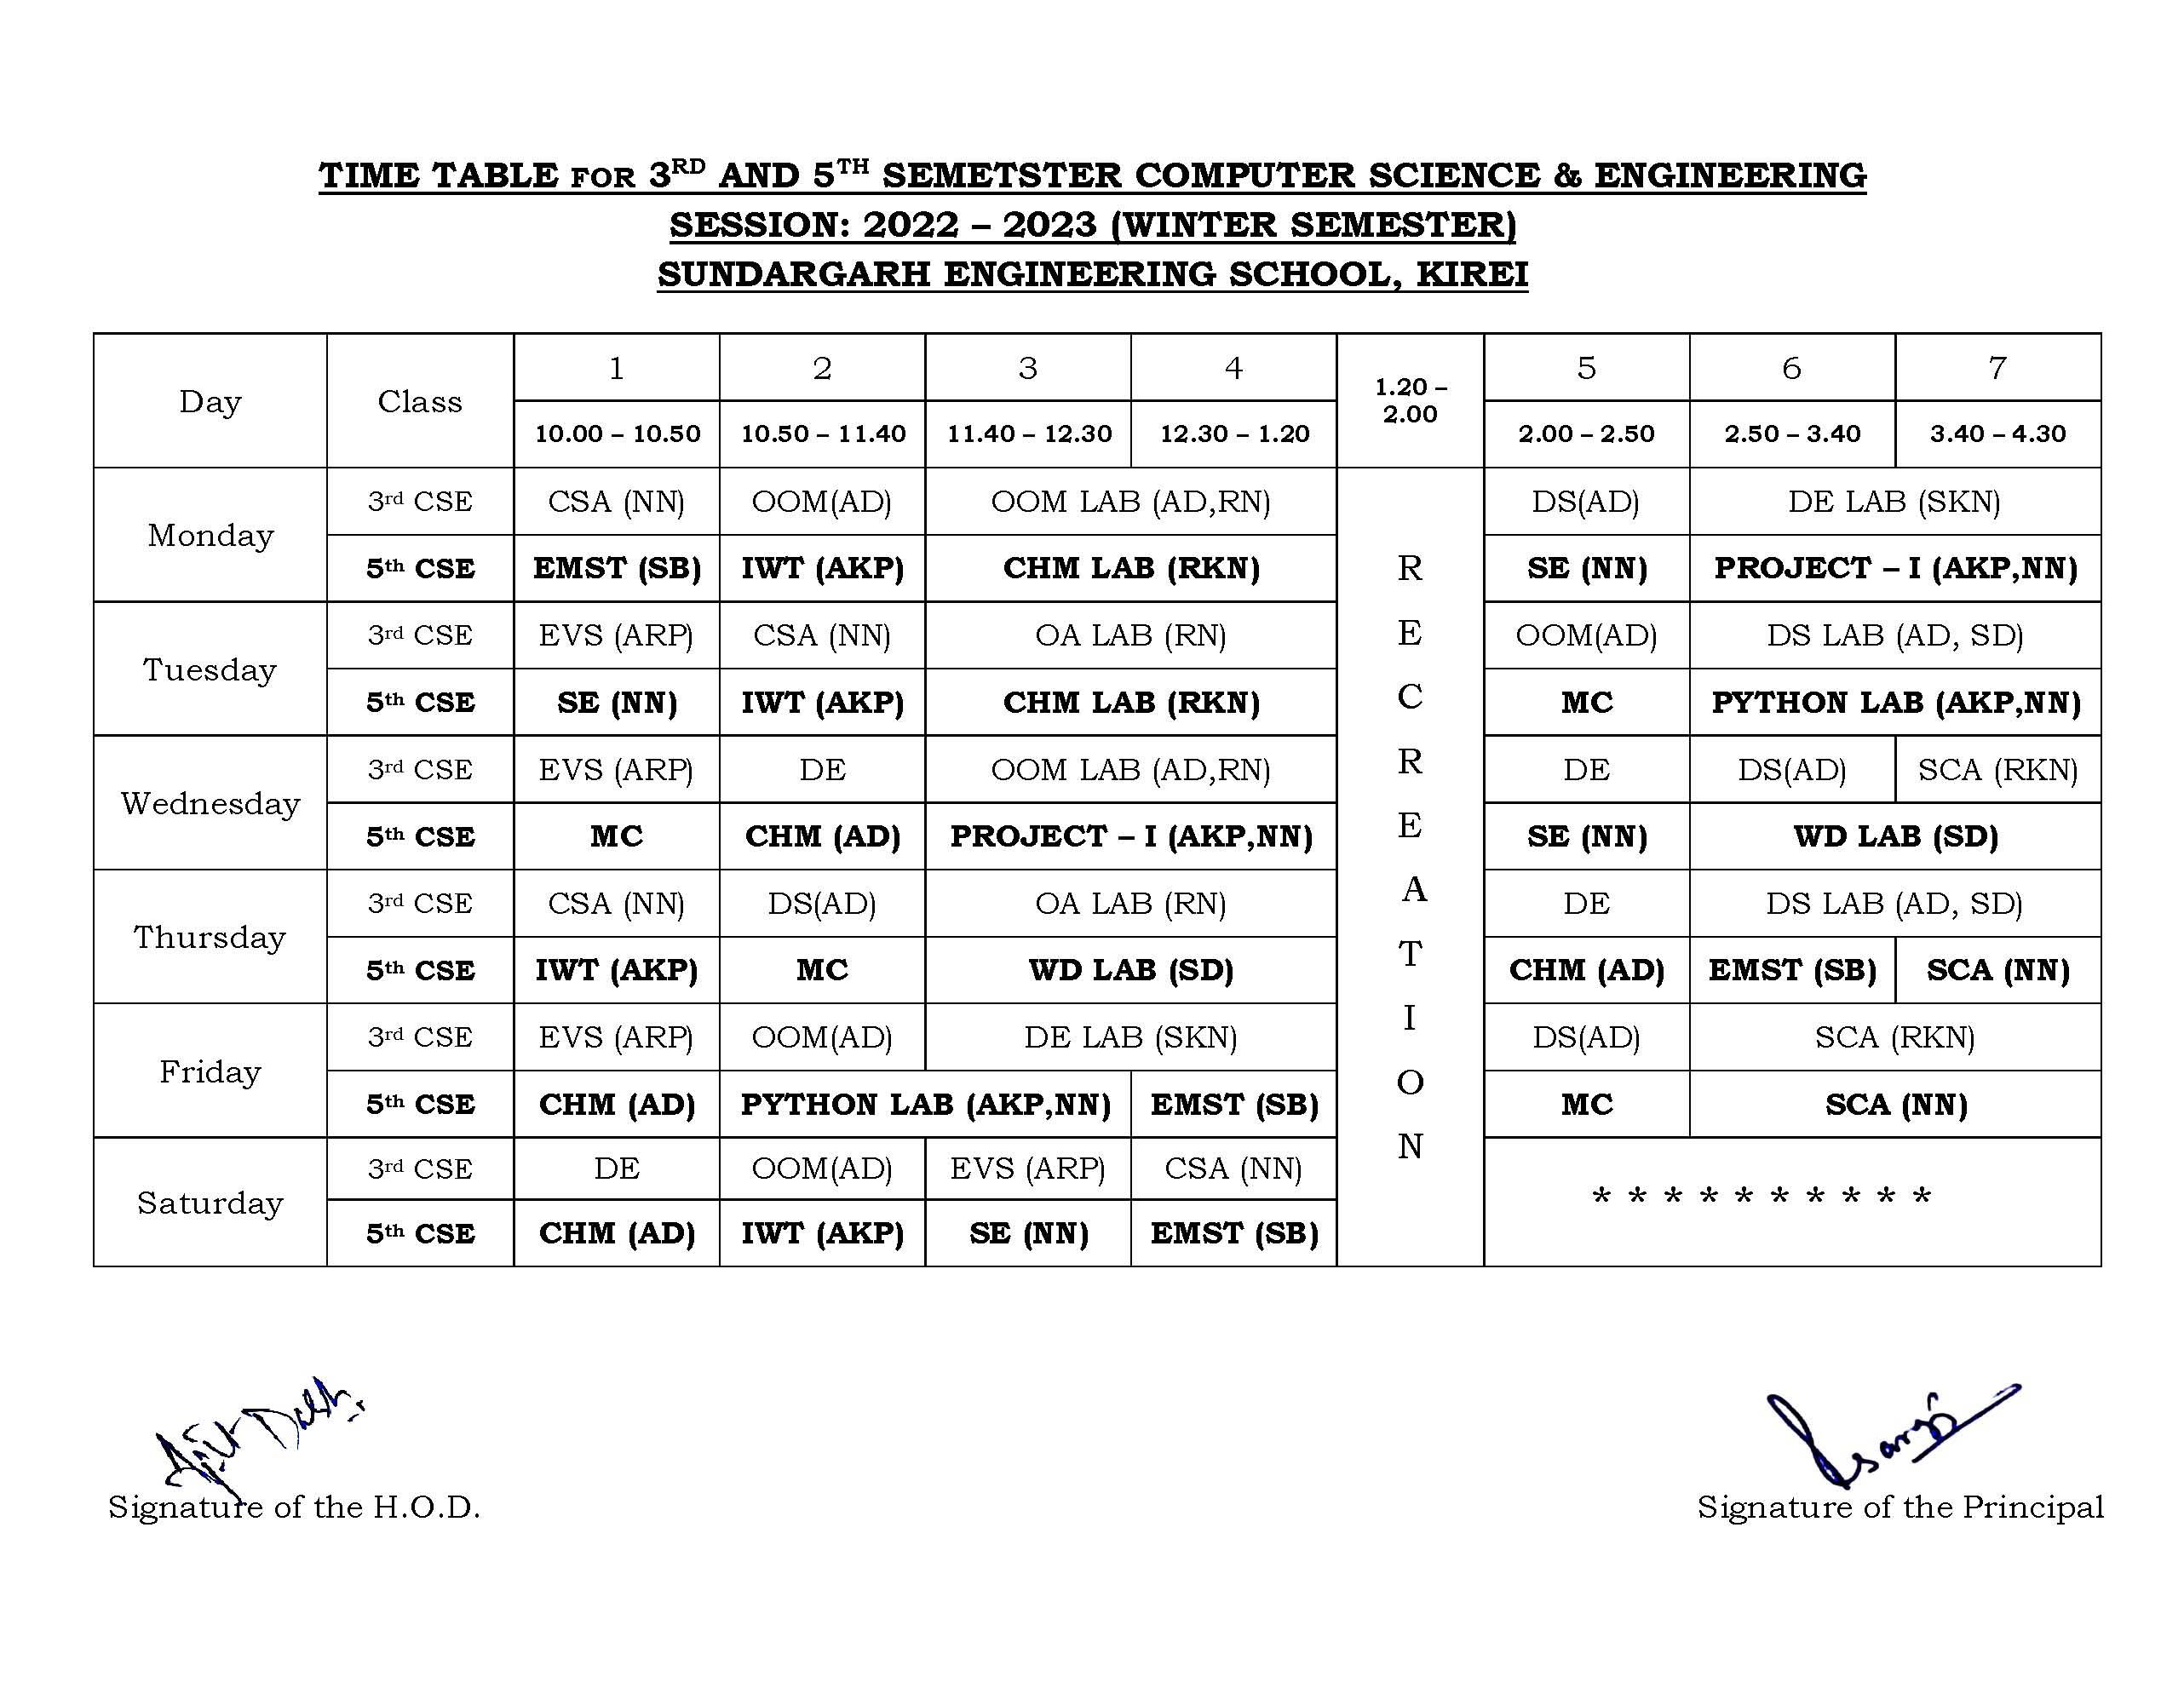 TIME TABLE FOR THIRD AND FIFTH SEMESTER CSE WINTER SEMESTER 2022